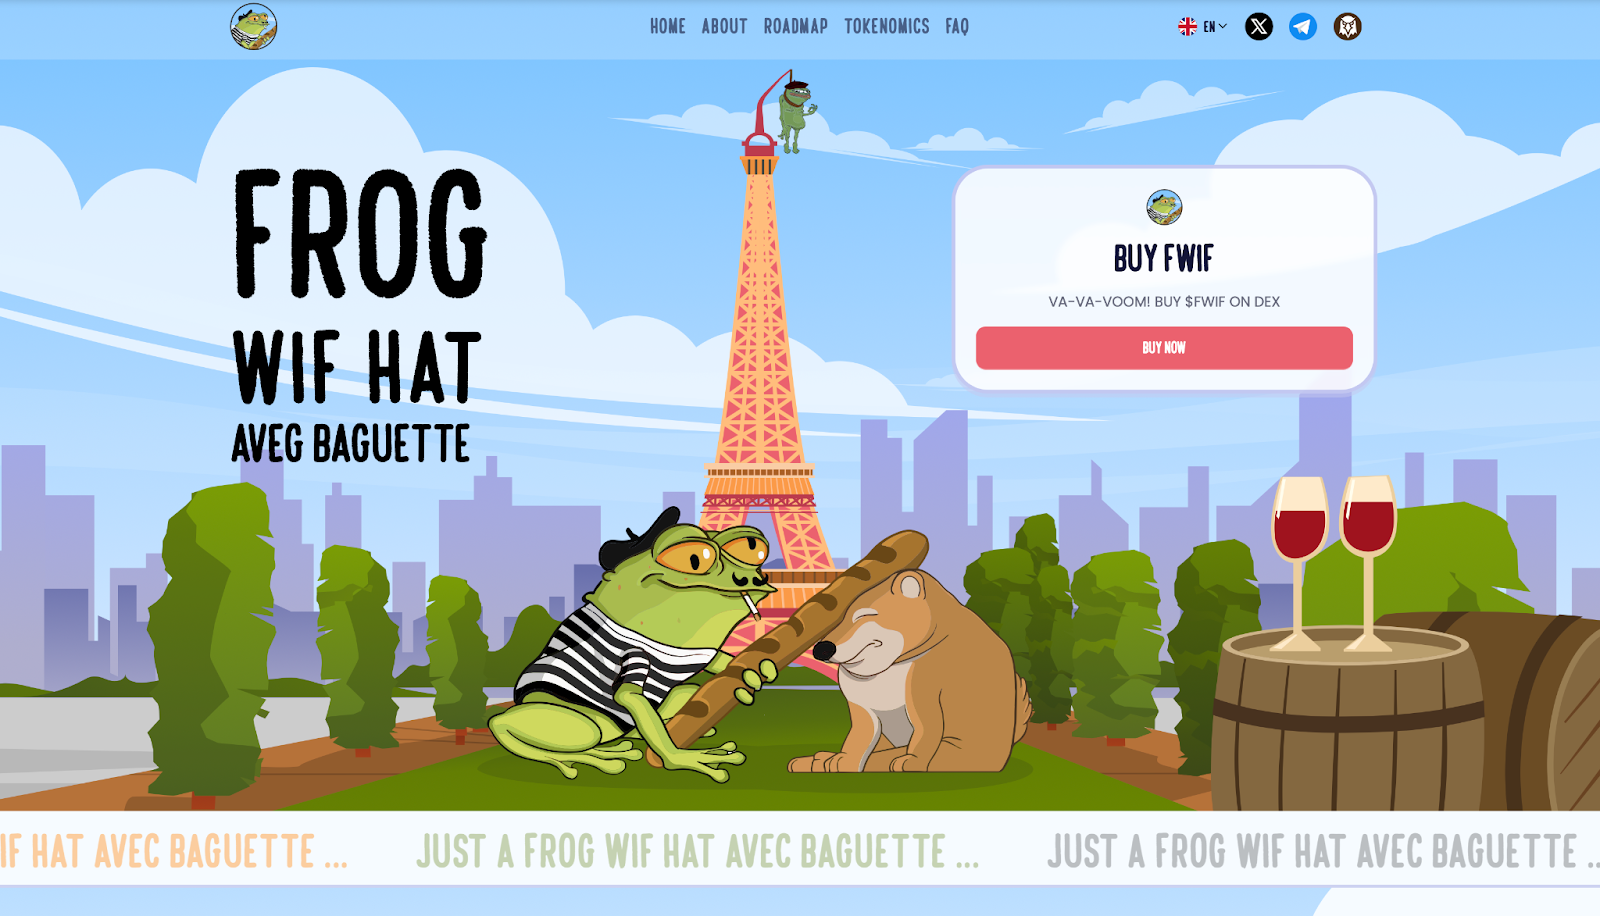 frog wif hat